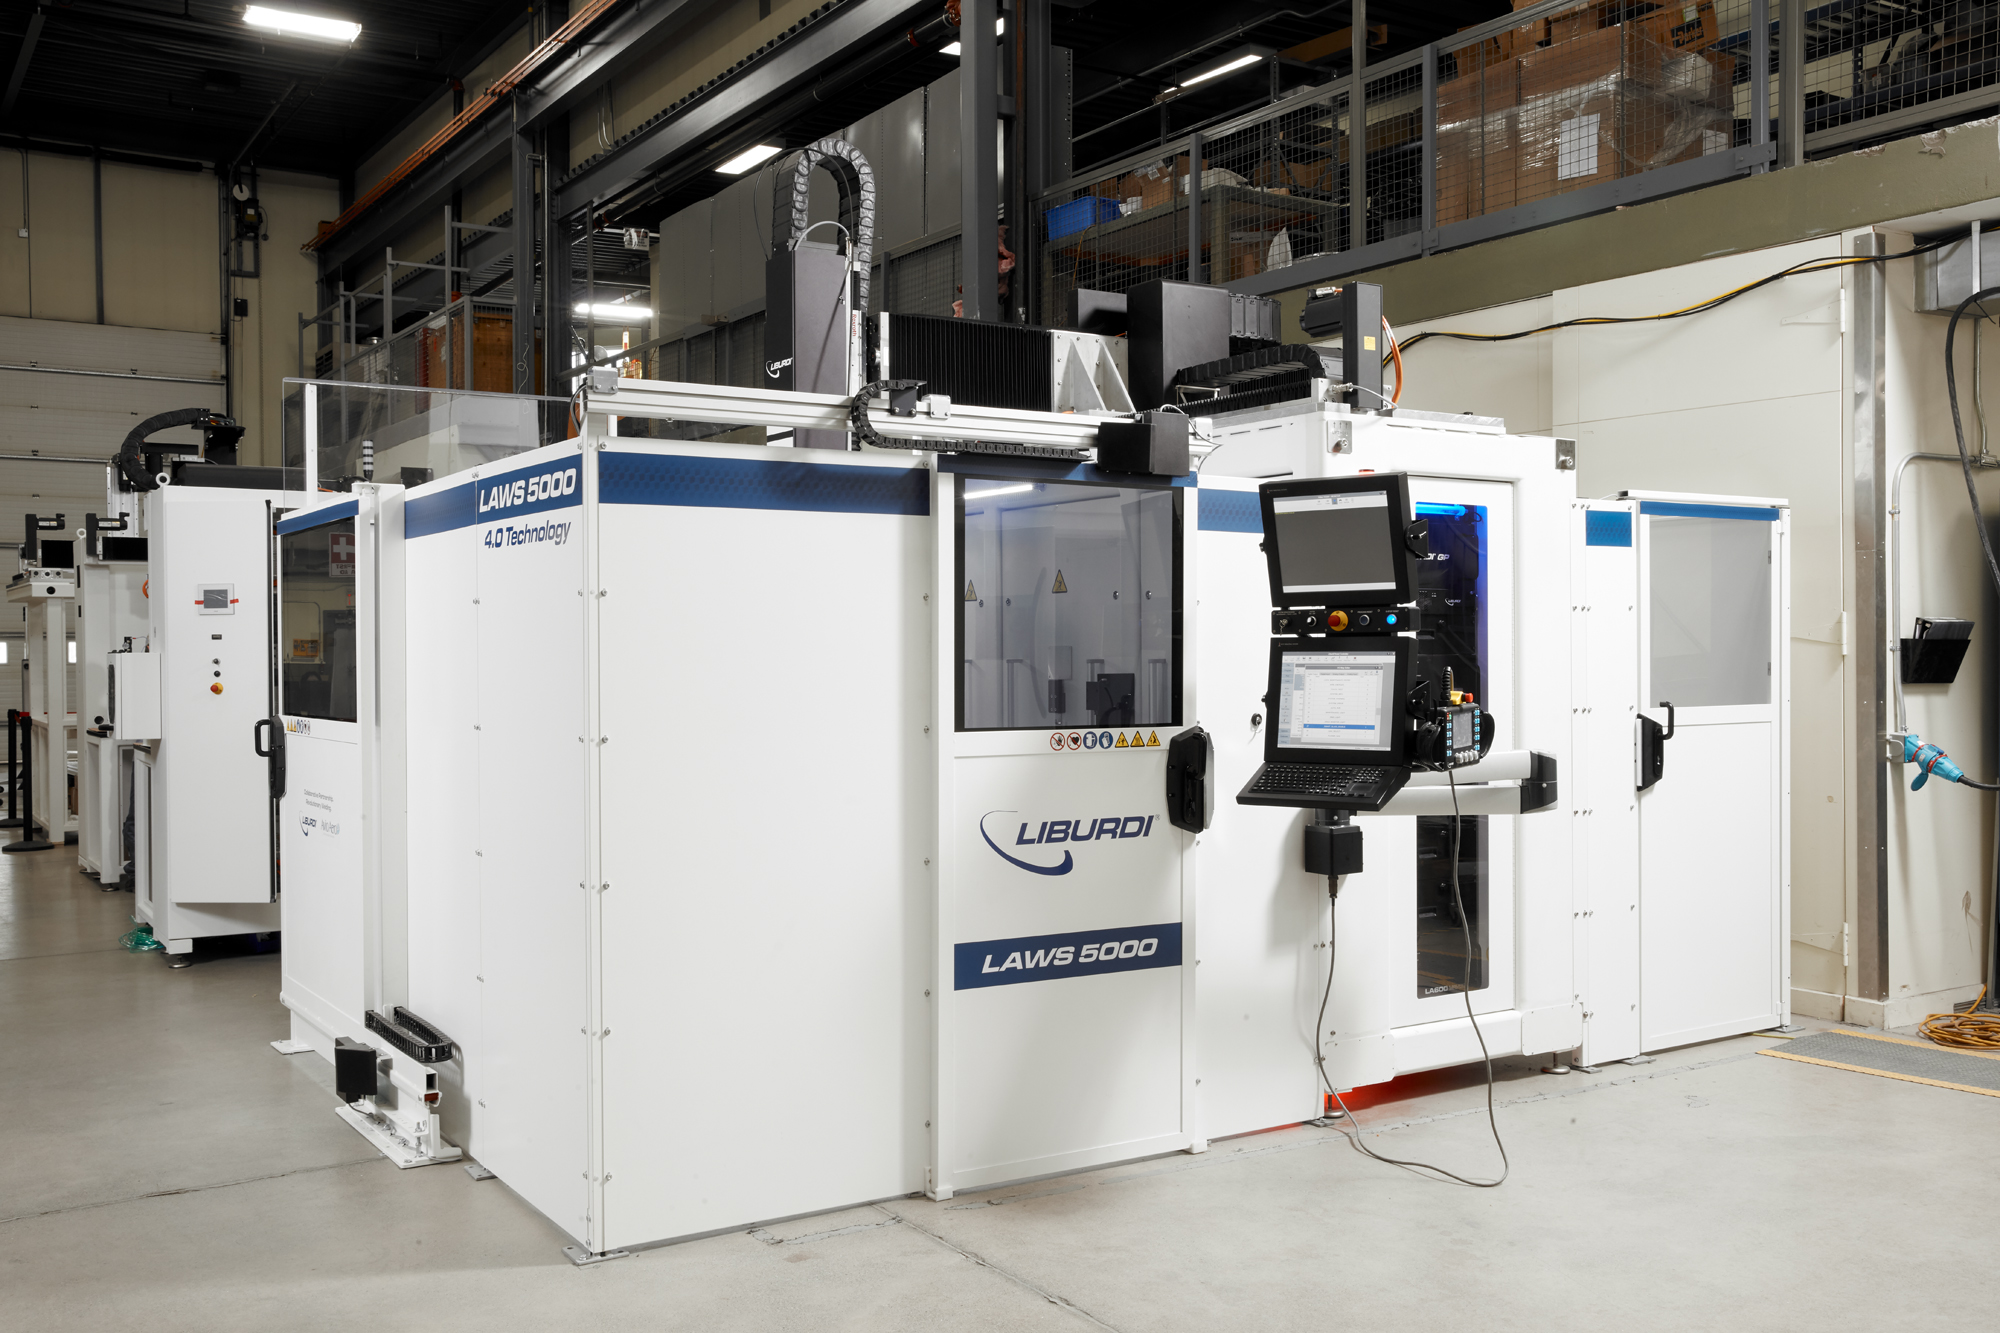 Liburdi Automated Welding System_LAWS 5000